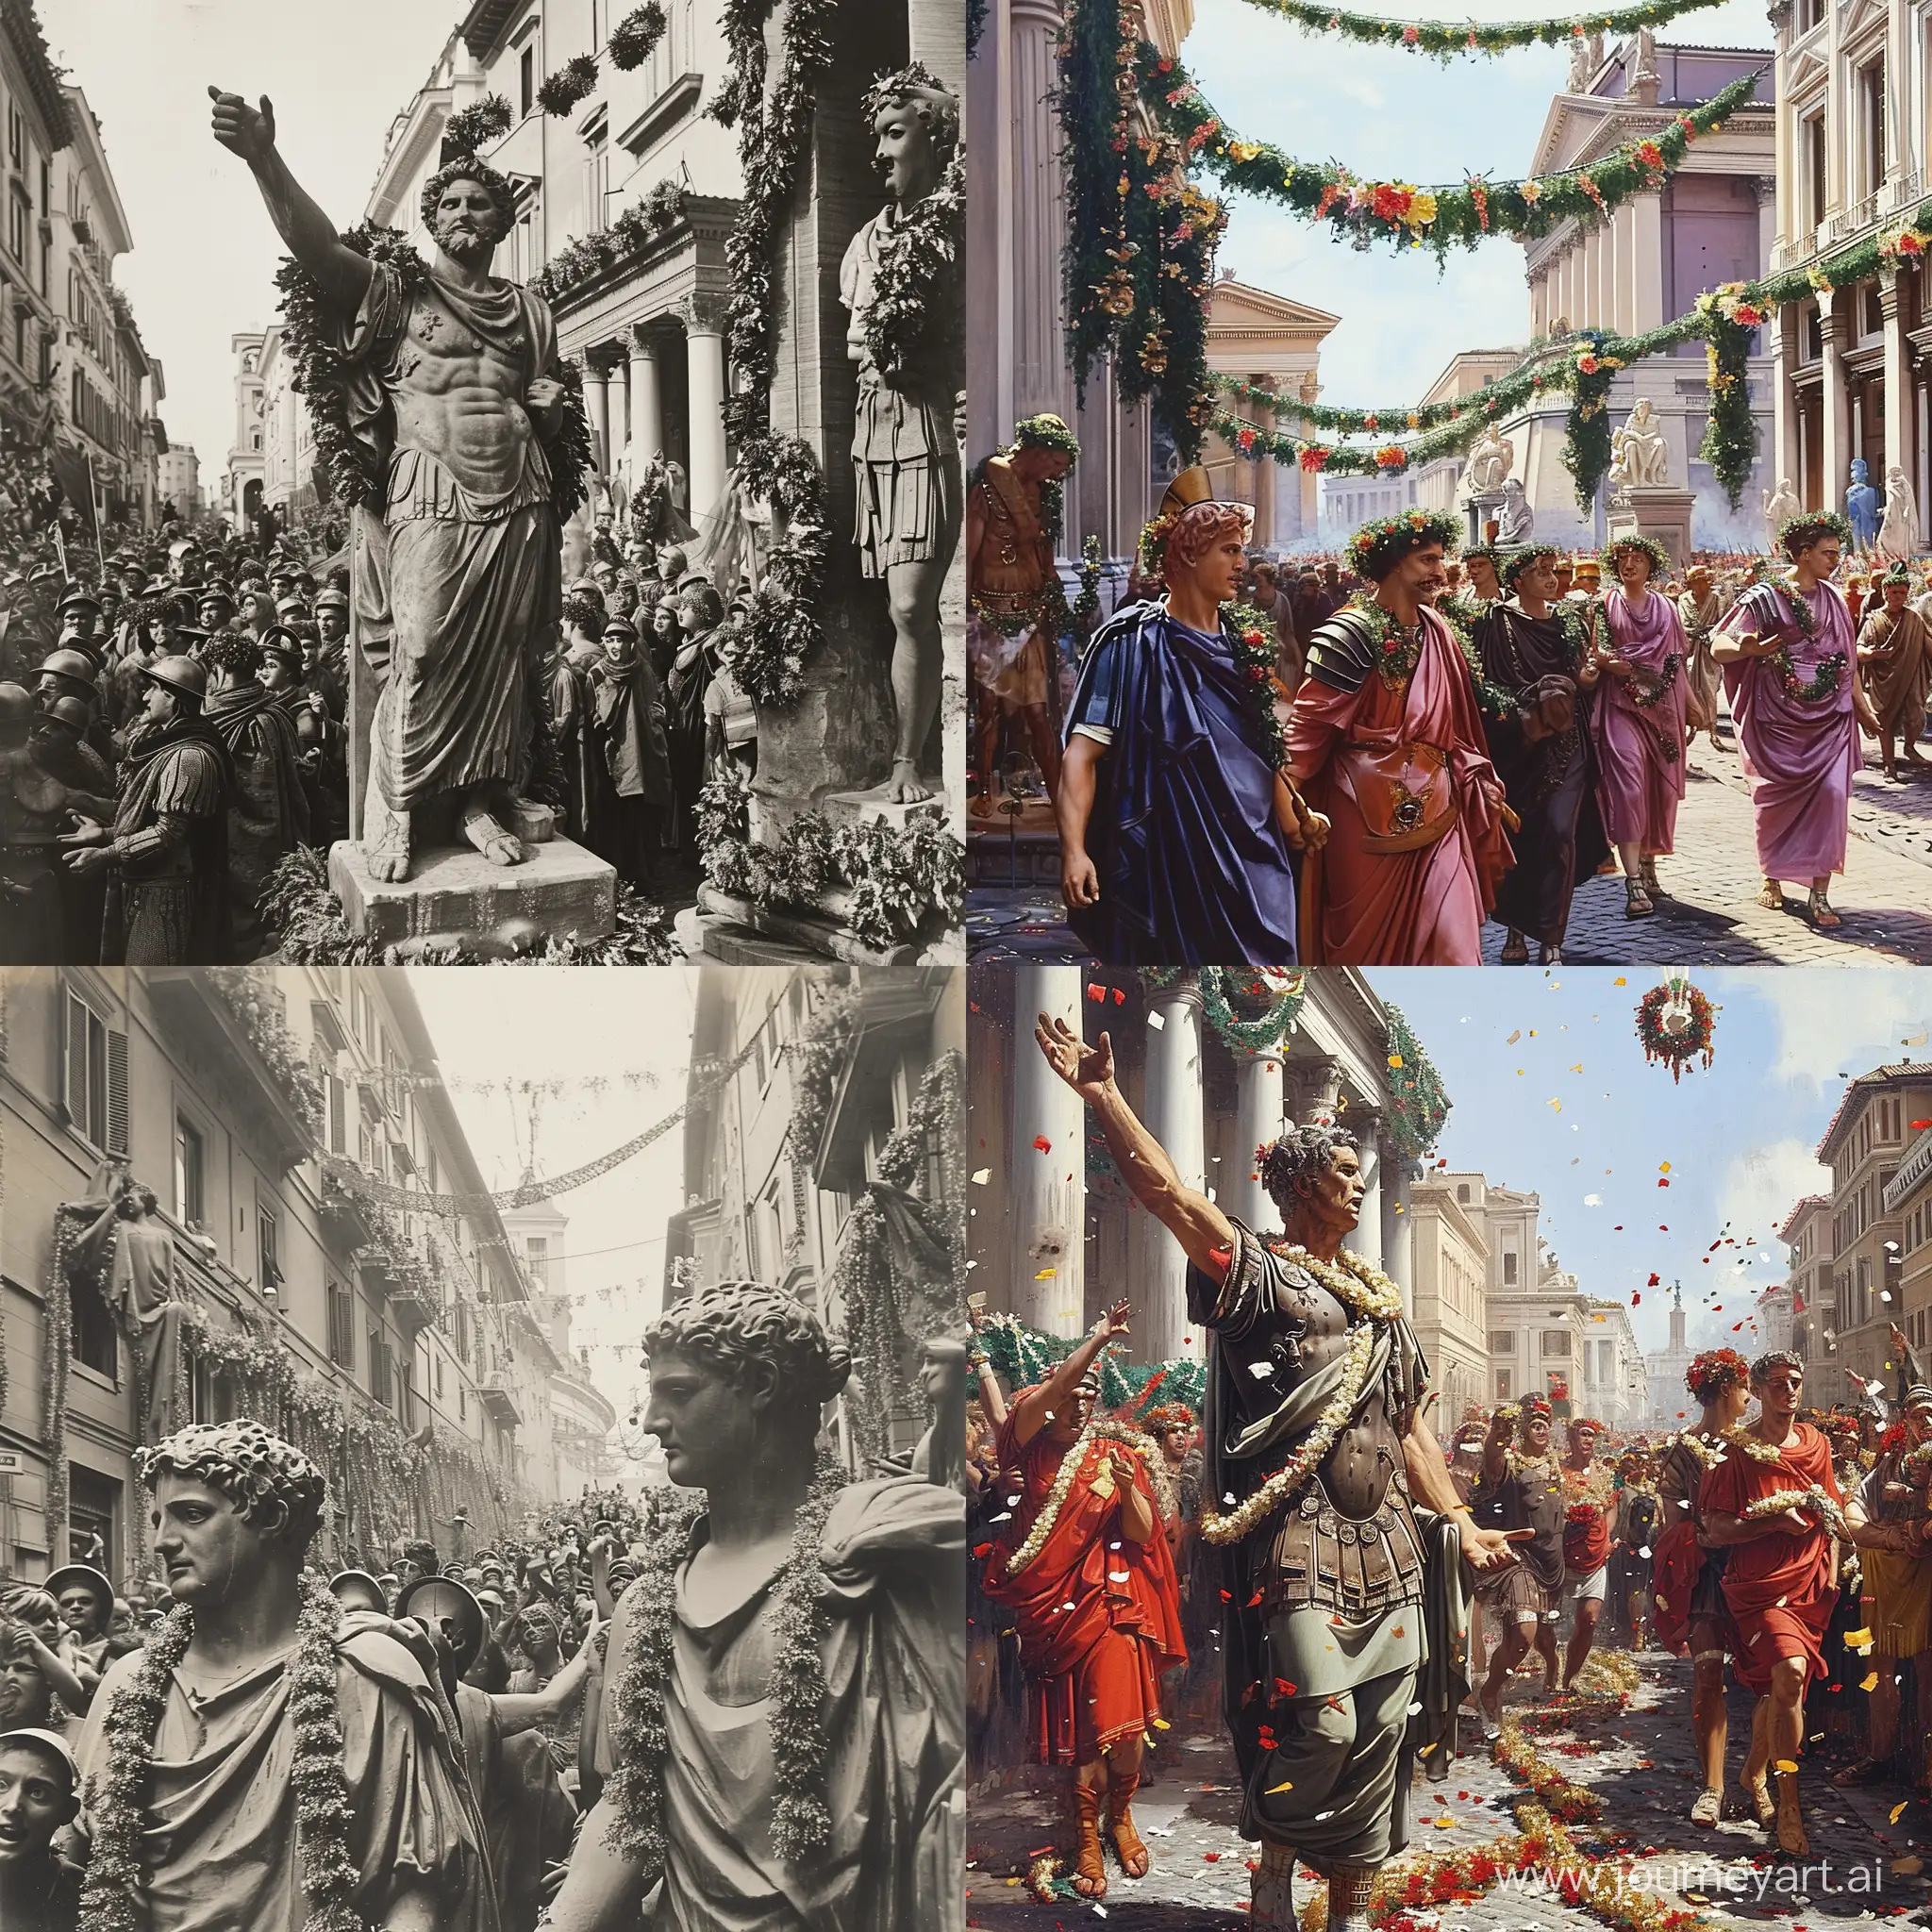 Streets of Roam, people celebrating Caesar's Victory, Caesar statues decorated with garlands